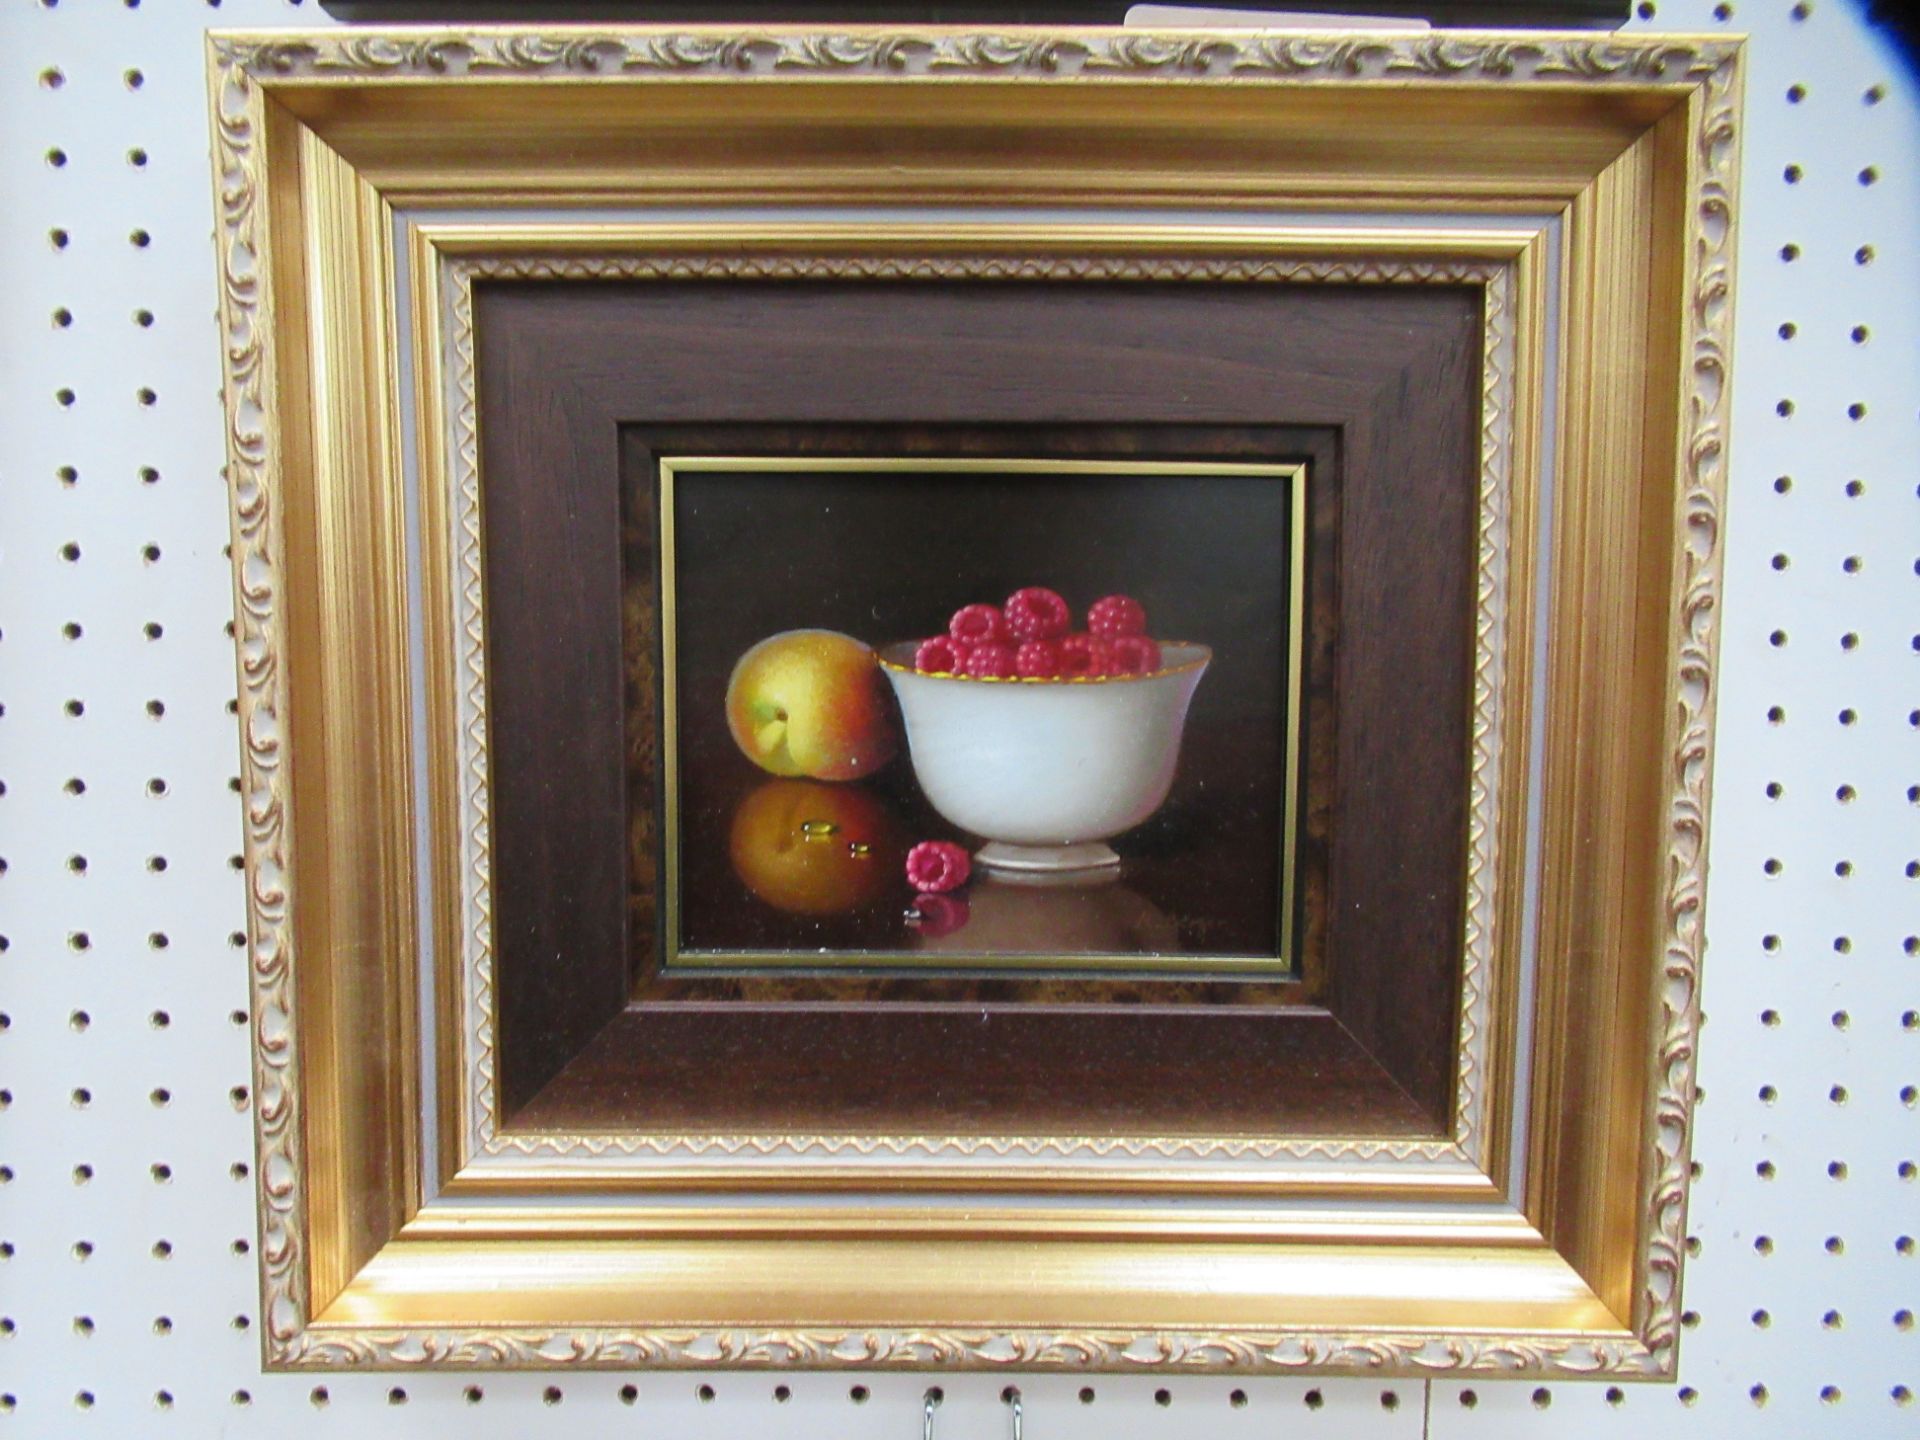 'Raspberries' Oil Painting by Ronald Berger, RRP £595 (12" x 13" including frame) - Image 2 of 3